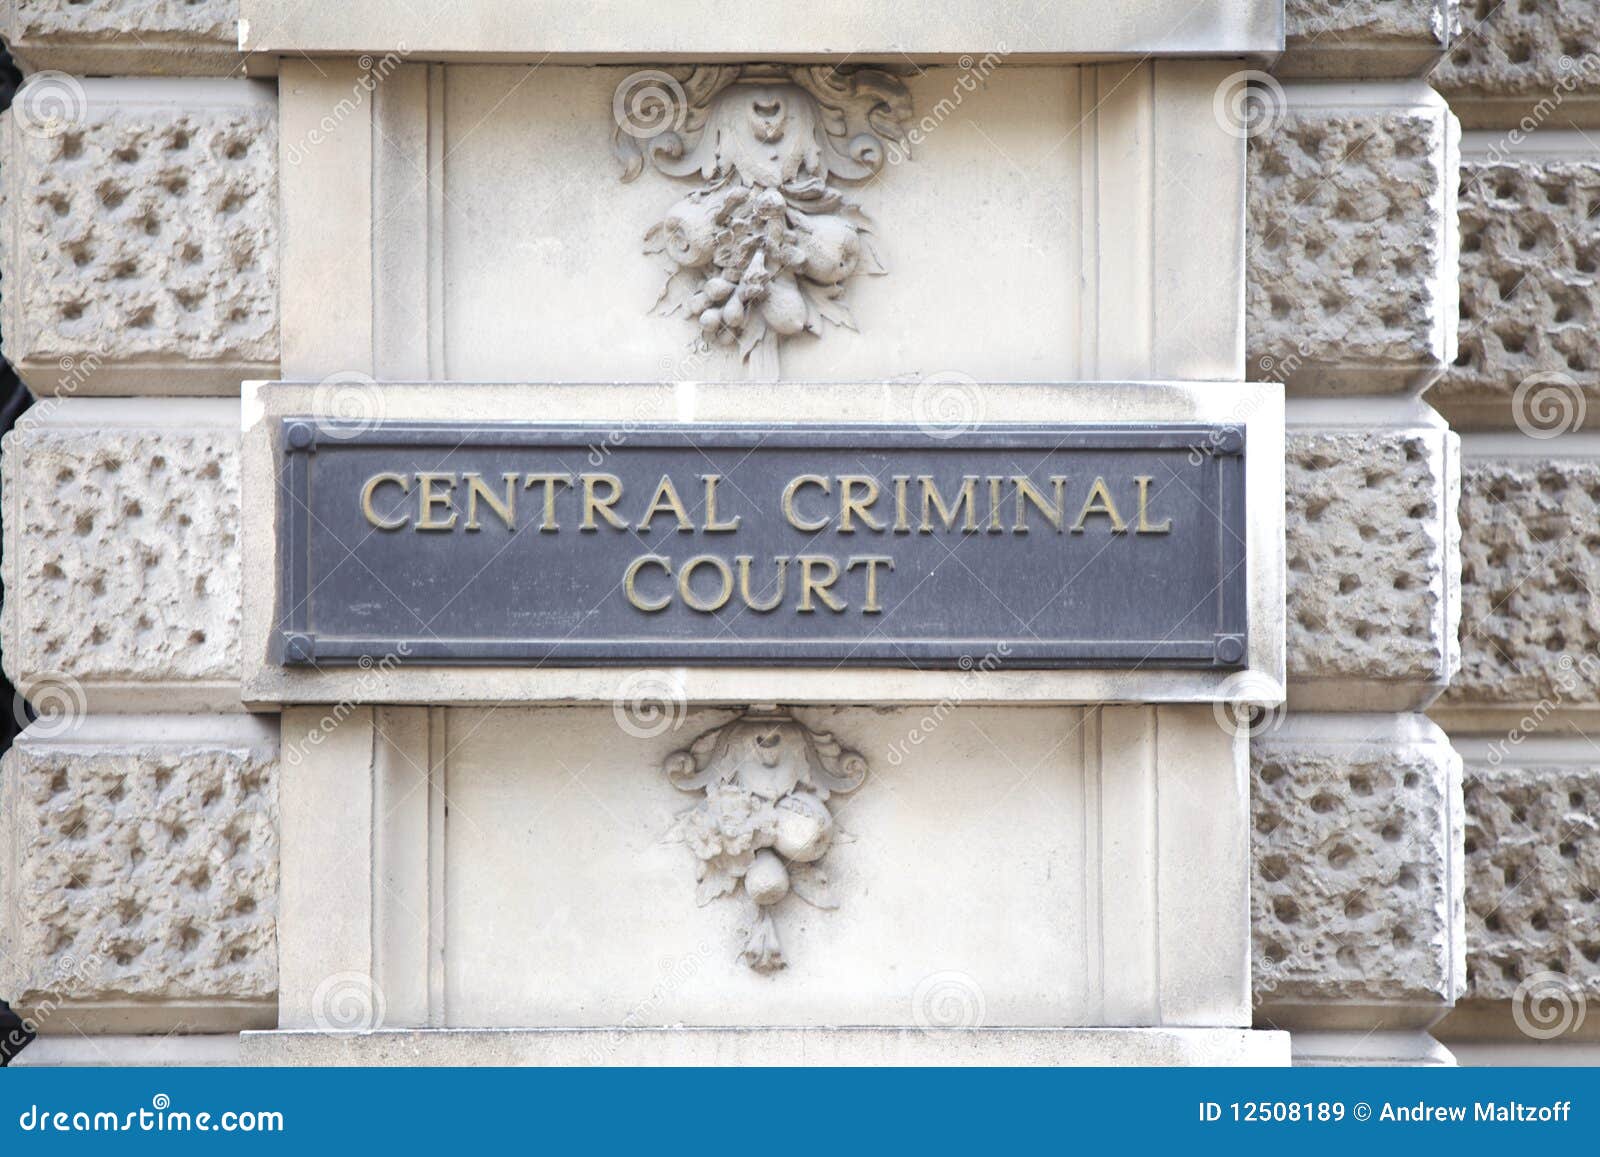 Central Criminal Court Royalty Free Stock Images - Image: 12508189